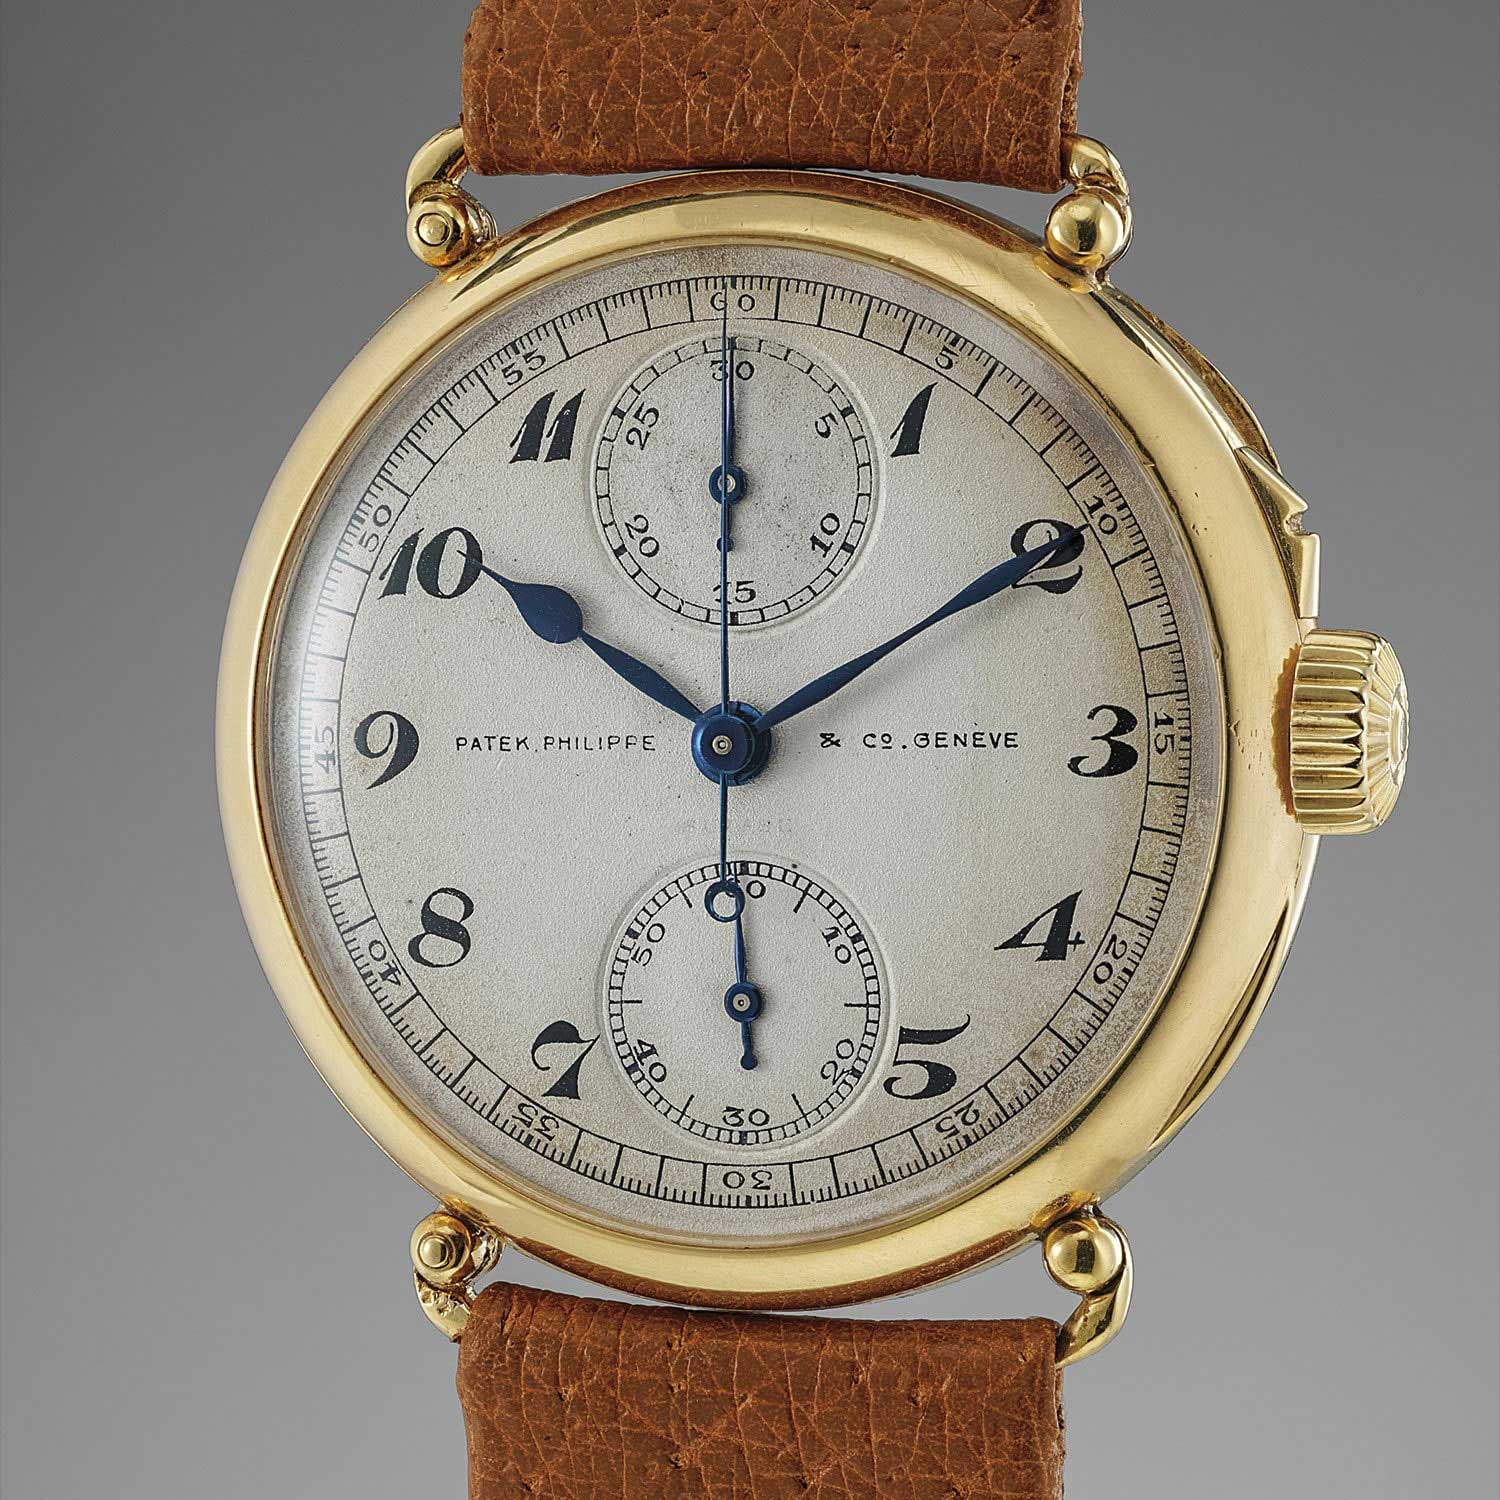 1924 Patek Philippe single pusher chronograph wristwatch with vertical registers and officer case (Image: phillipswatches.com)